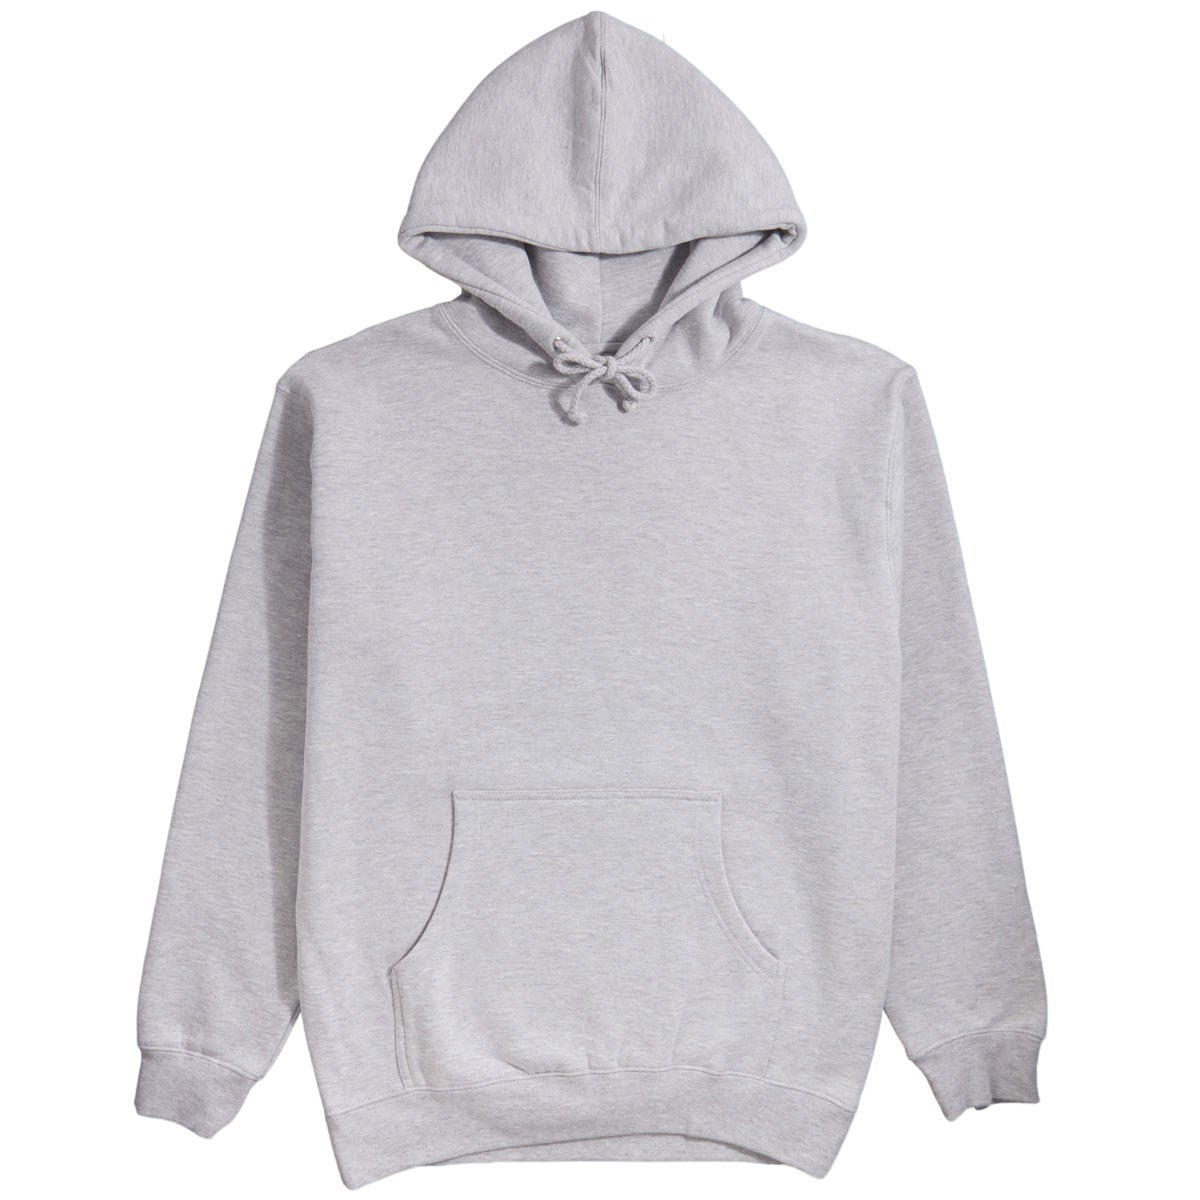 Keith Shore Color-Up Customs X Pullover Hoodie image 3